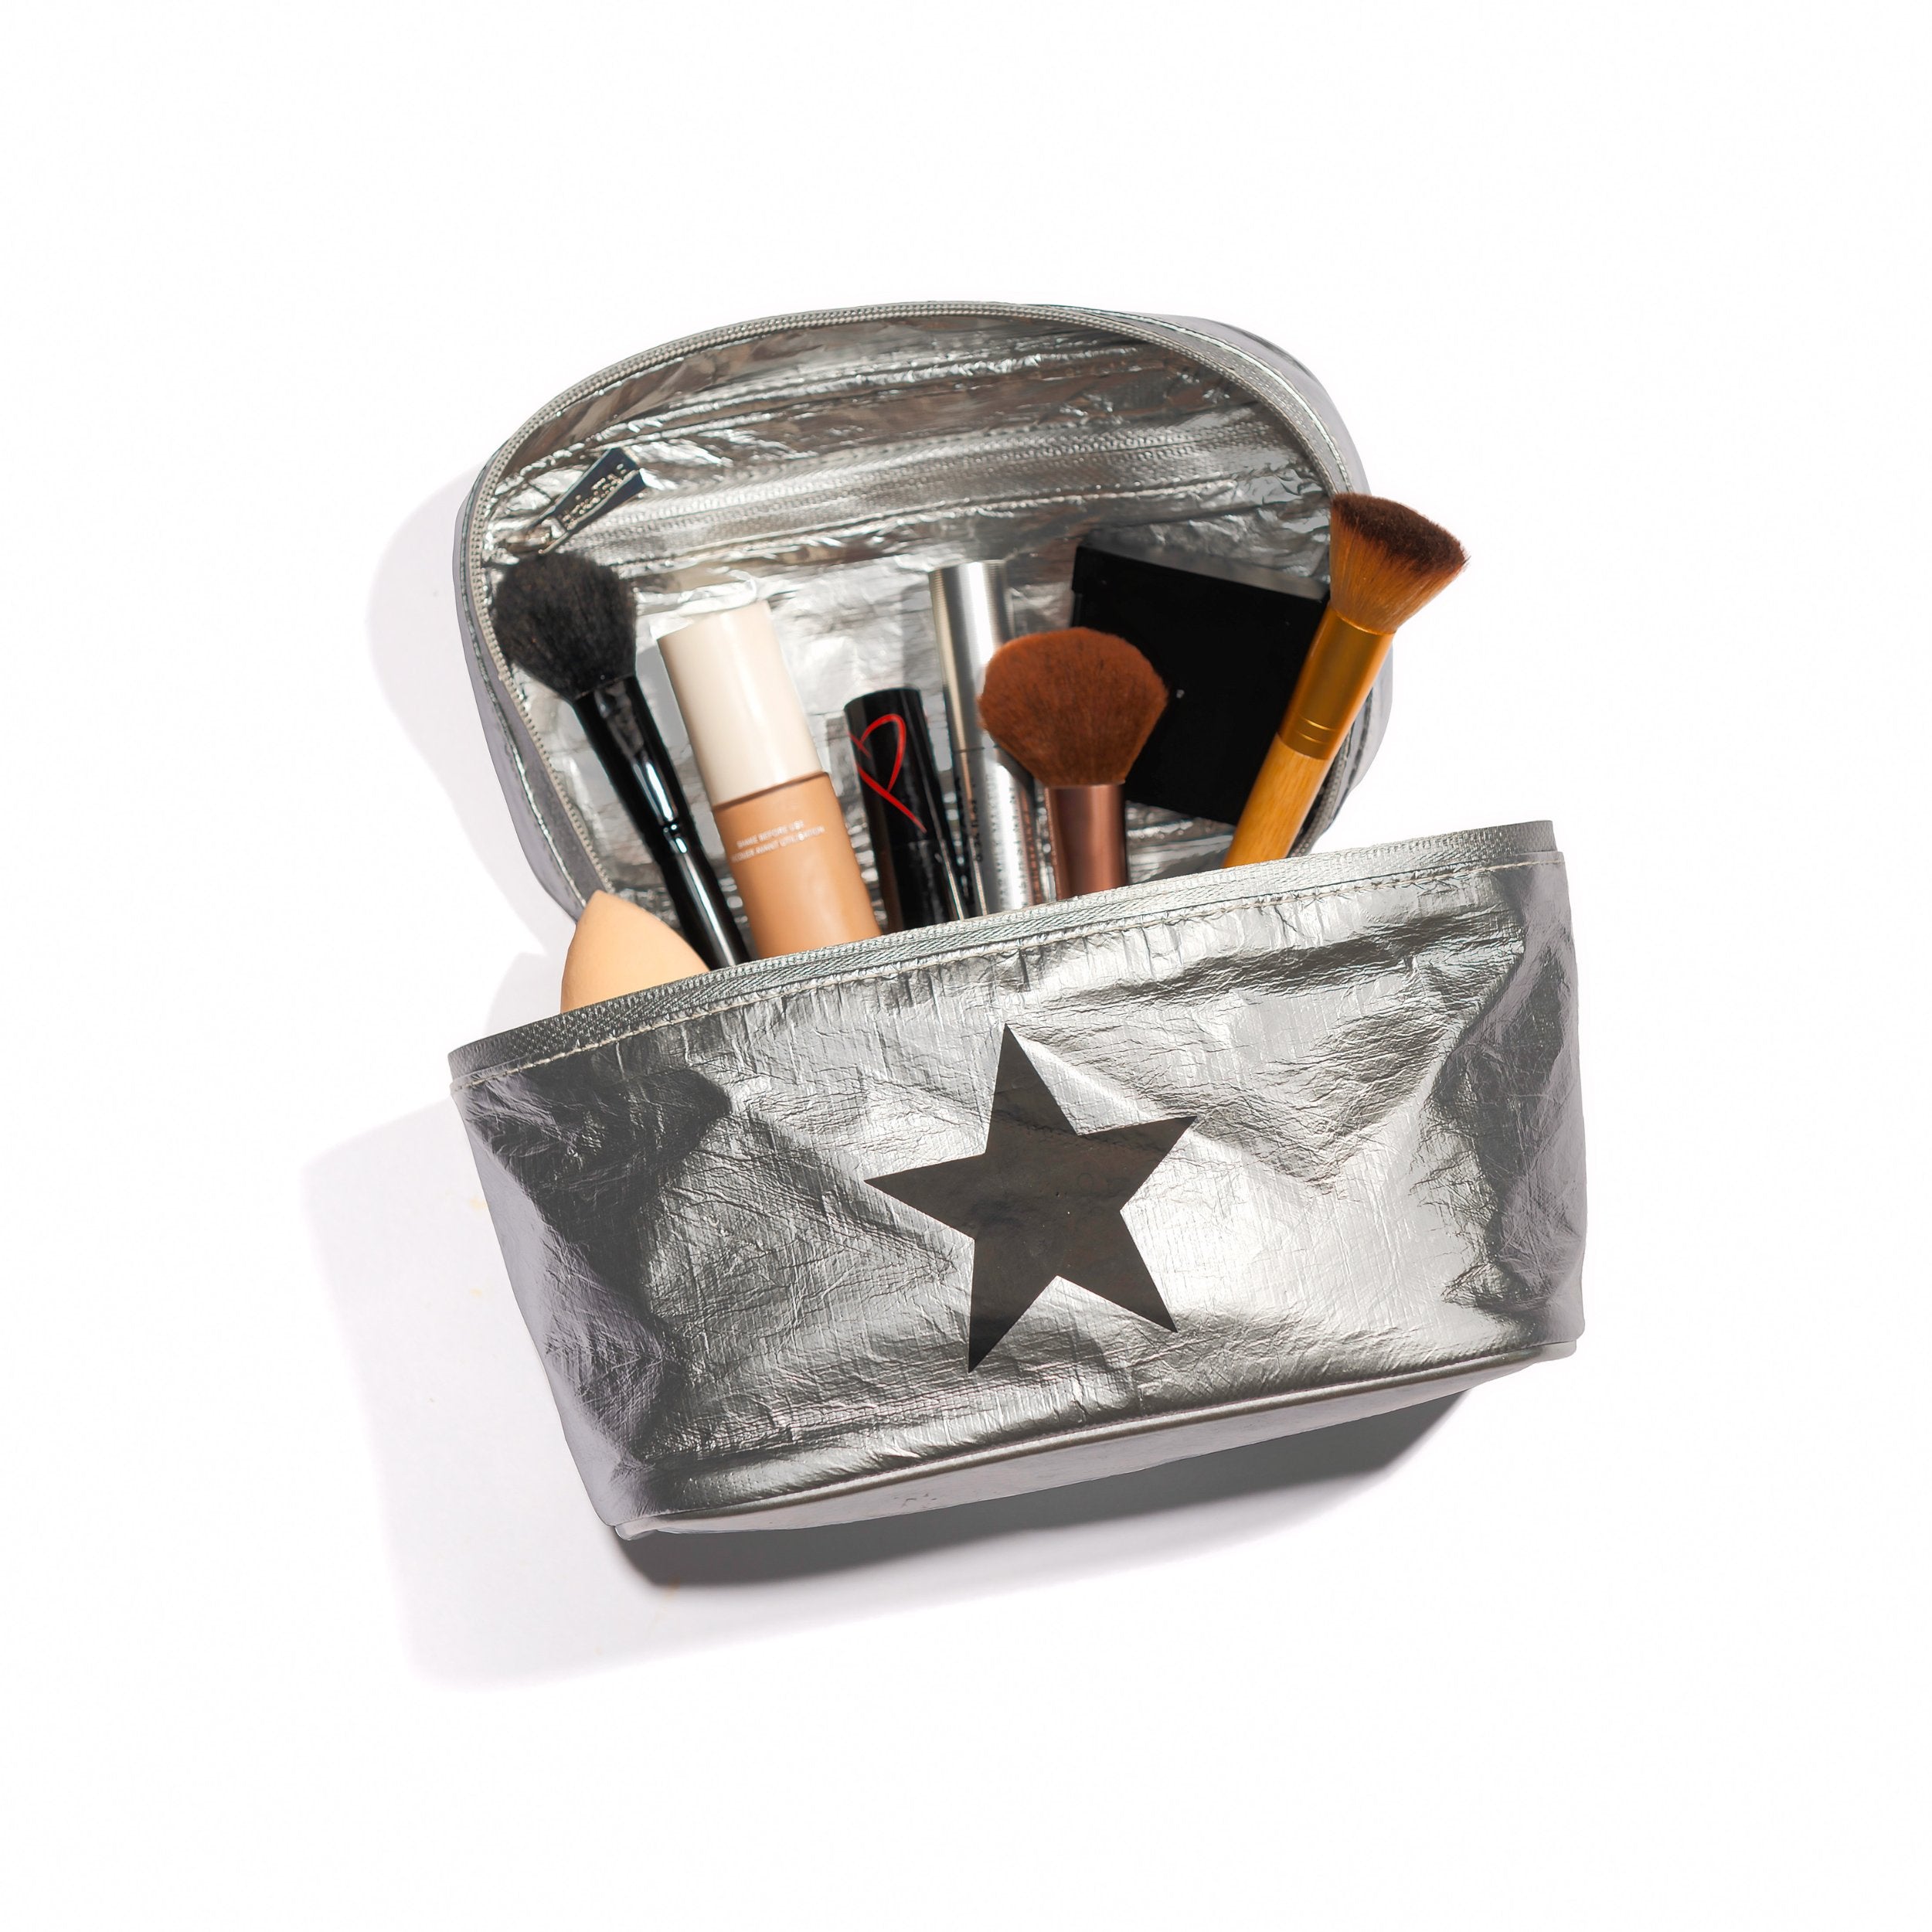 Silver cosmetic case with makeup and makeup brushes